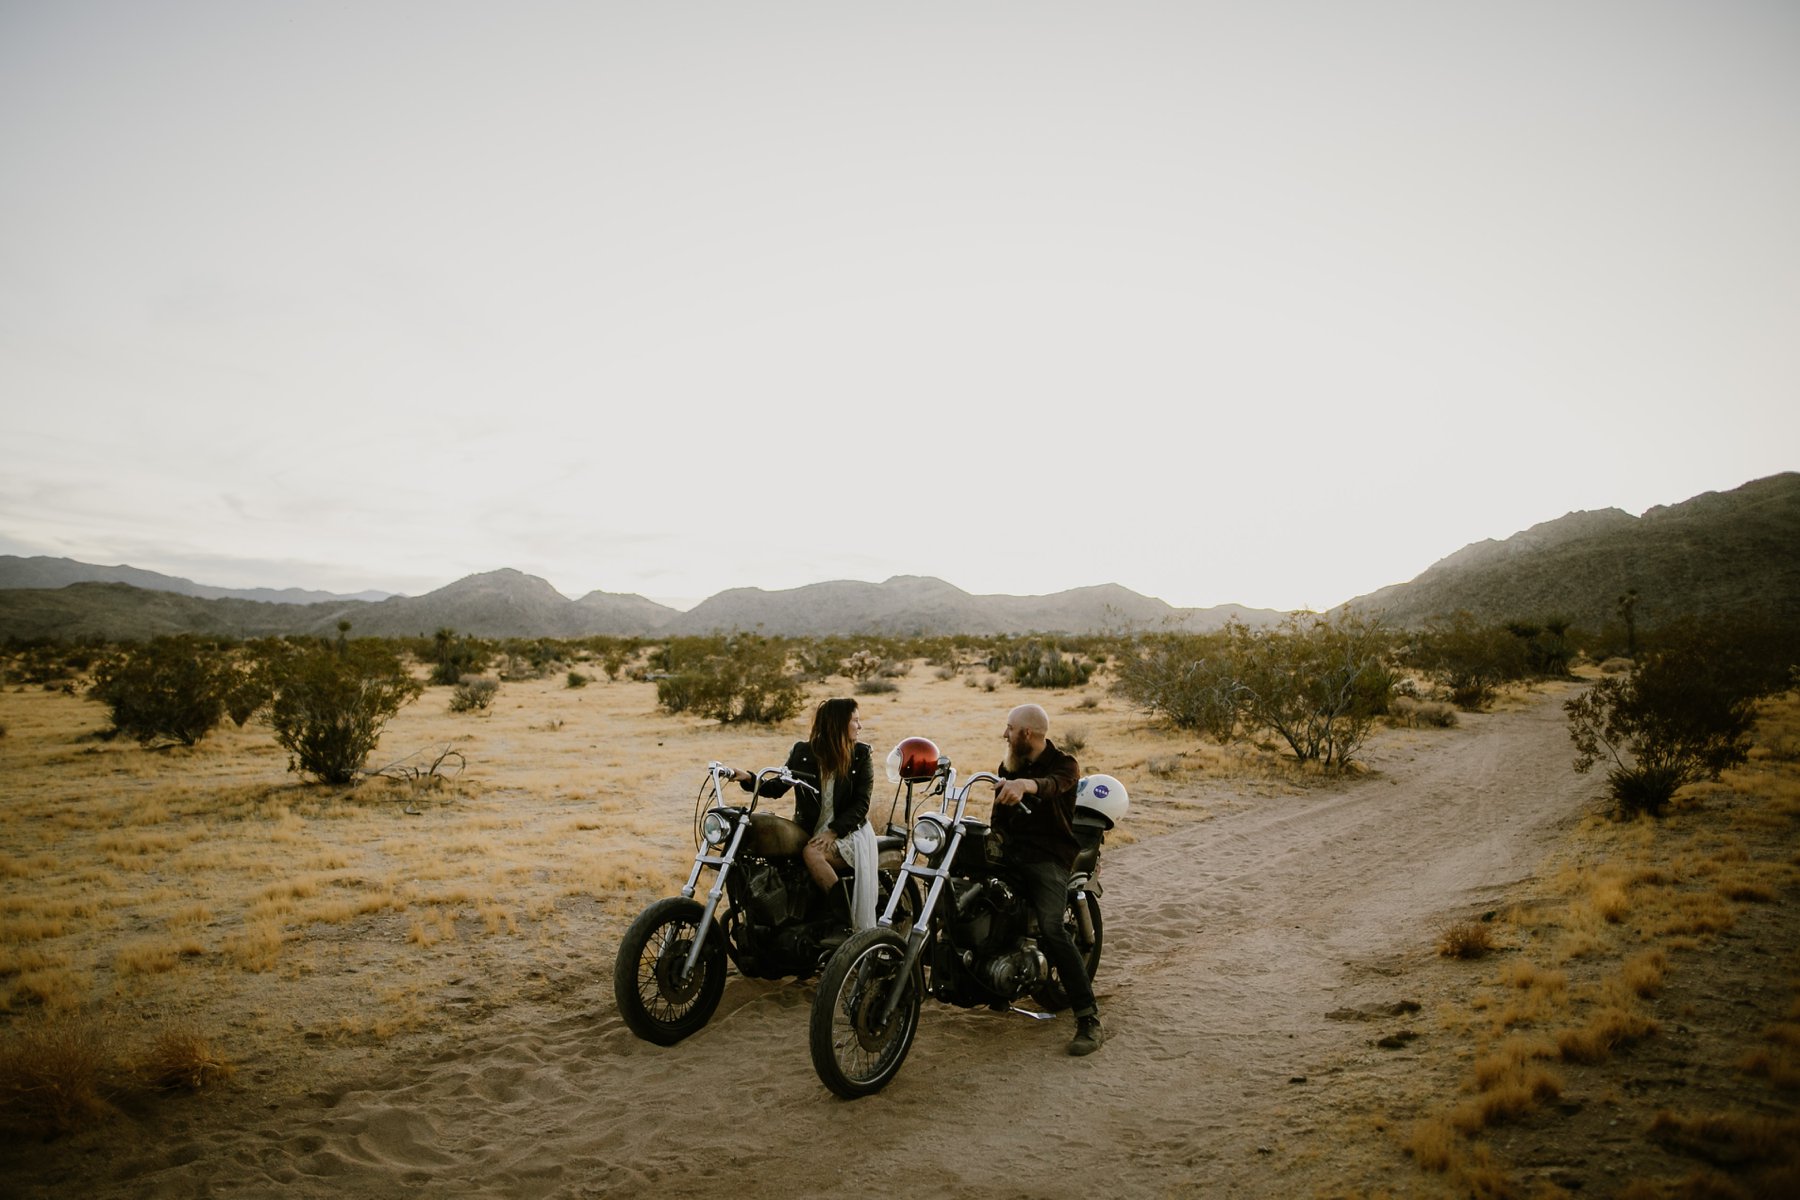 A photo at a motorcycle elopement